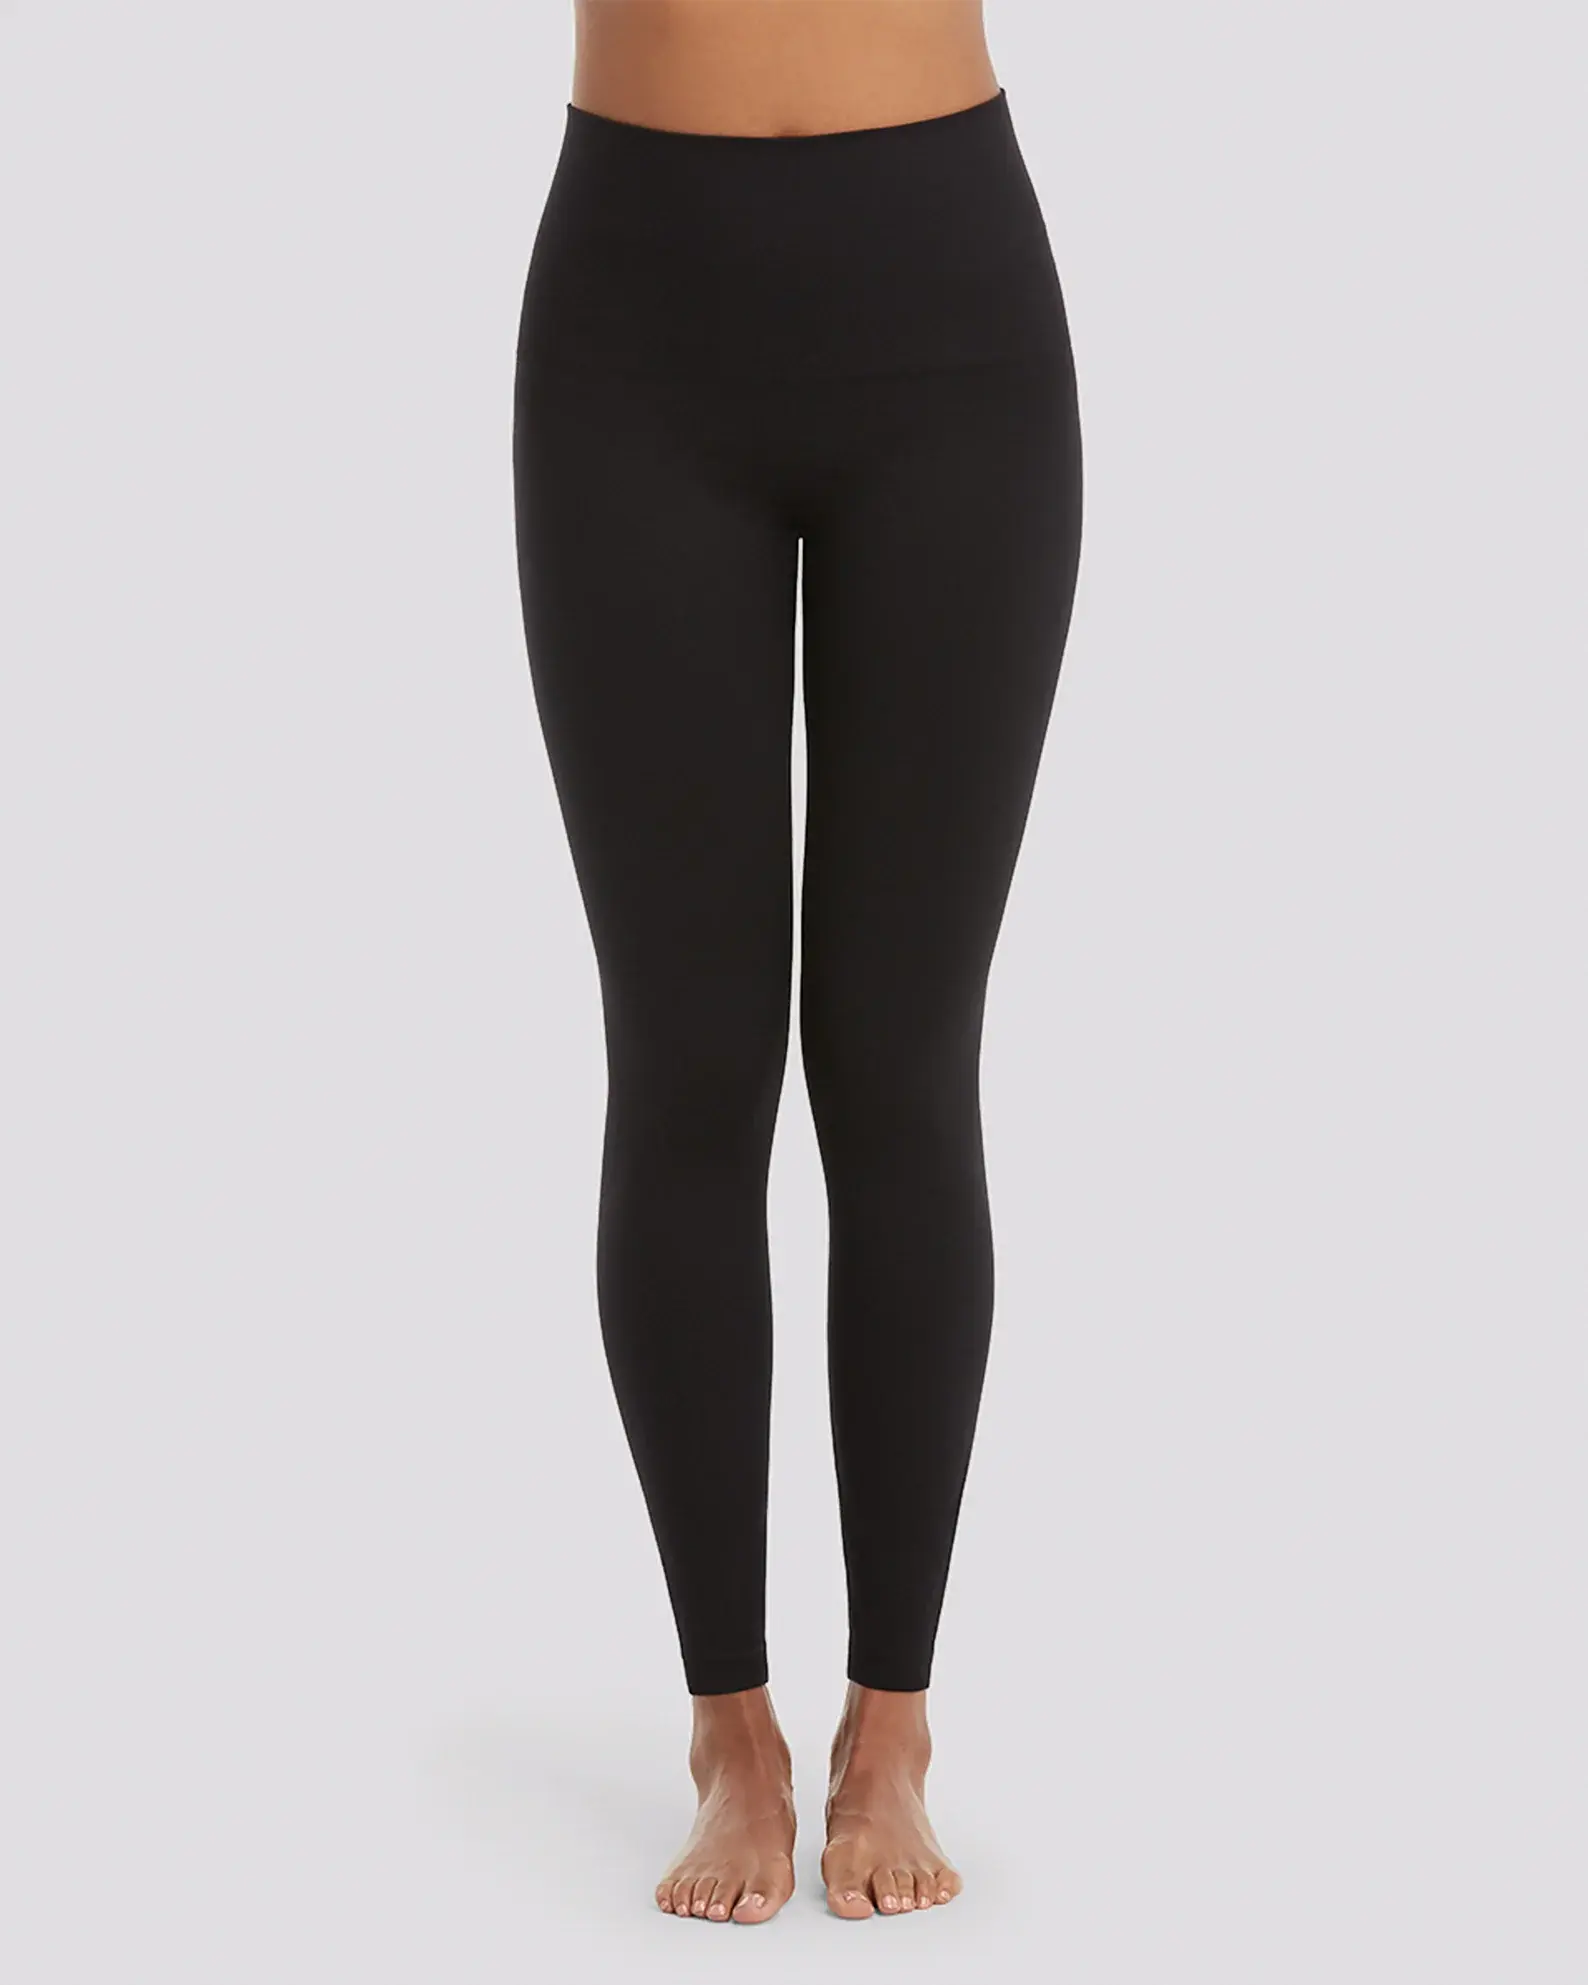 SPANX - Leggings SO GOOD that you need them in ALL the